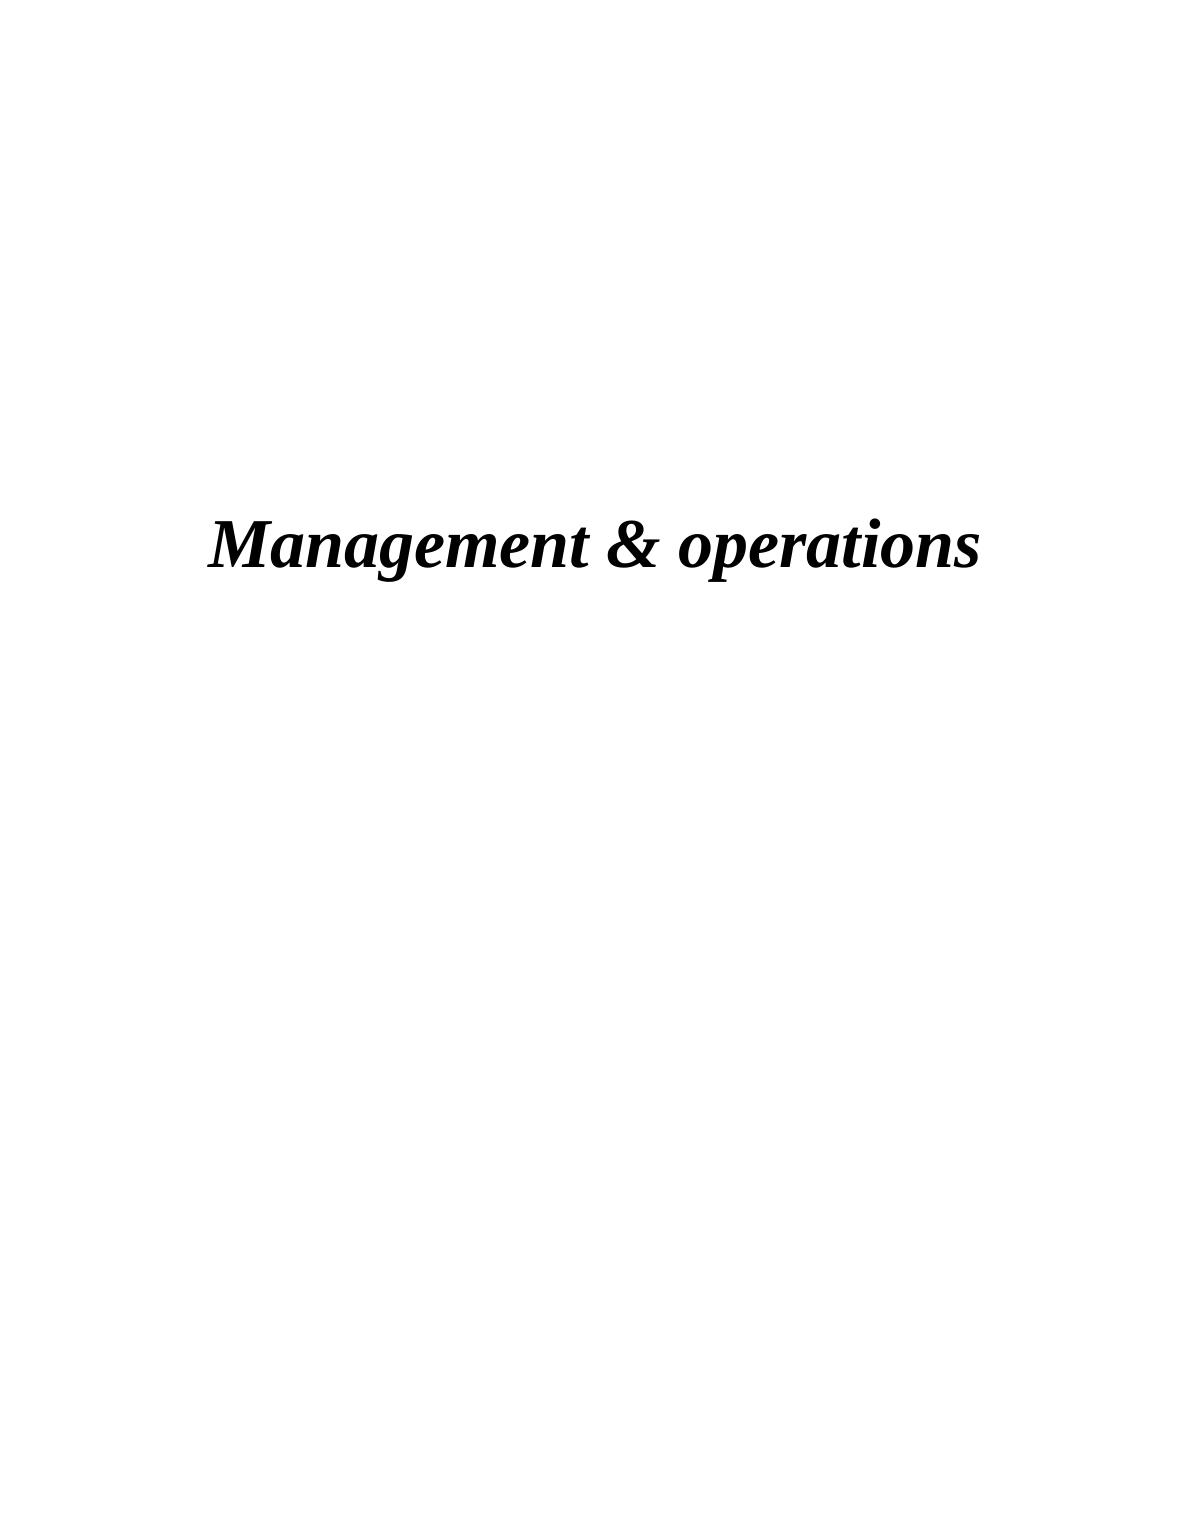 Management & Operations Functions_1